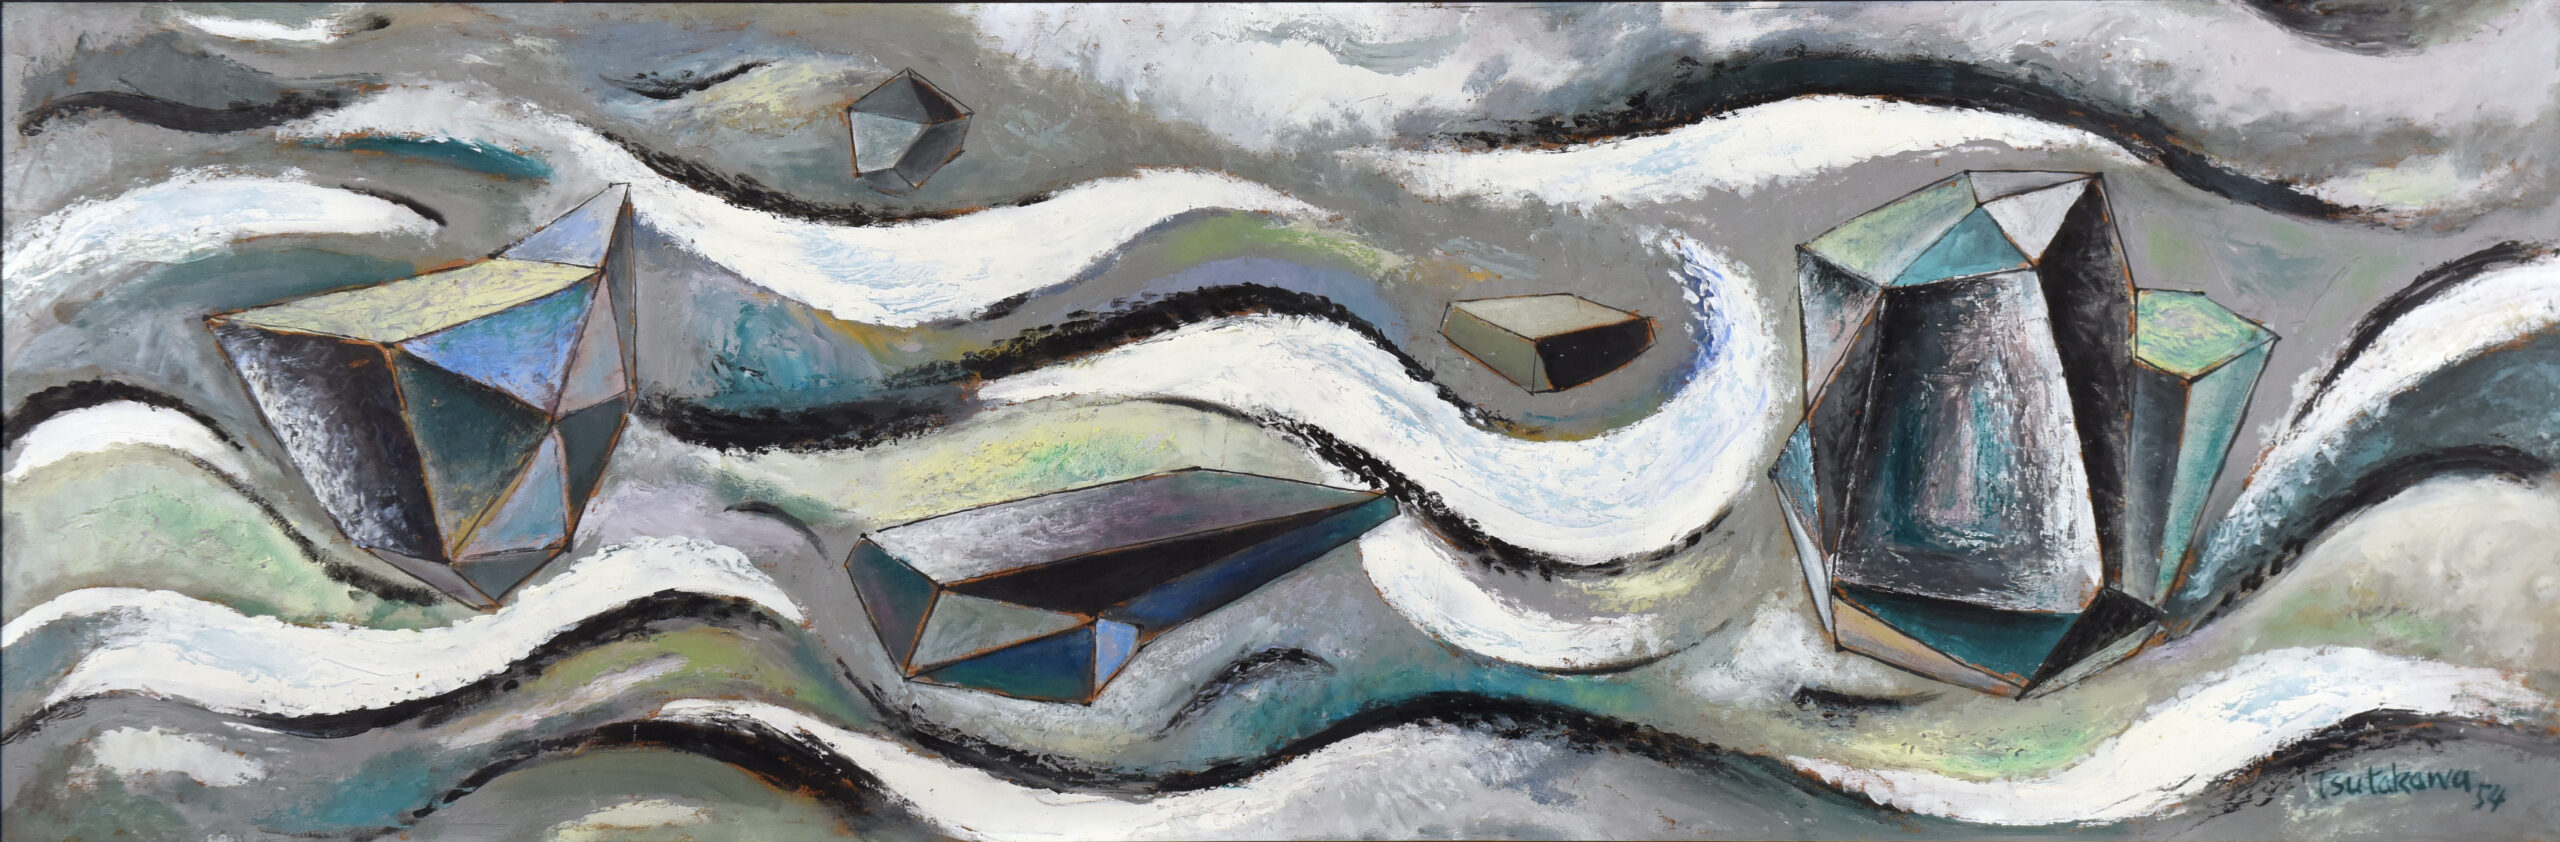 George Tsutakawa, 1910-1997 (Seattle), Rocks and Waves, 1987, oil on board, 22.5”h x 54”w, Private Collection, photo by John Pai